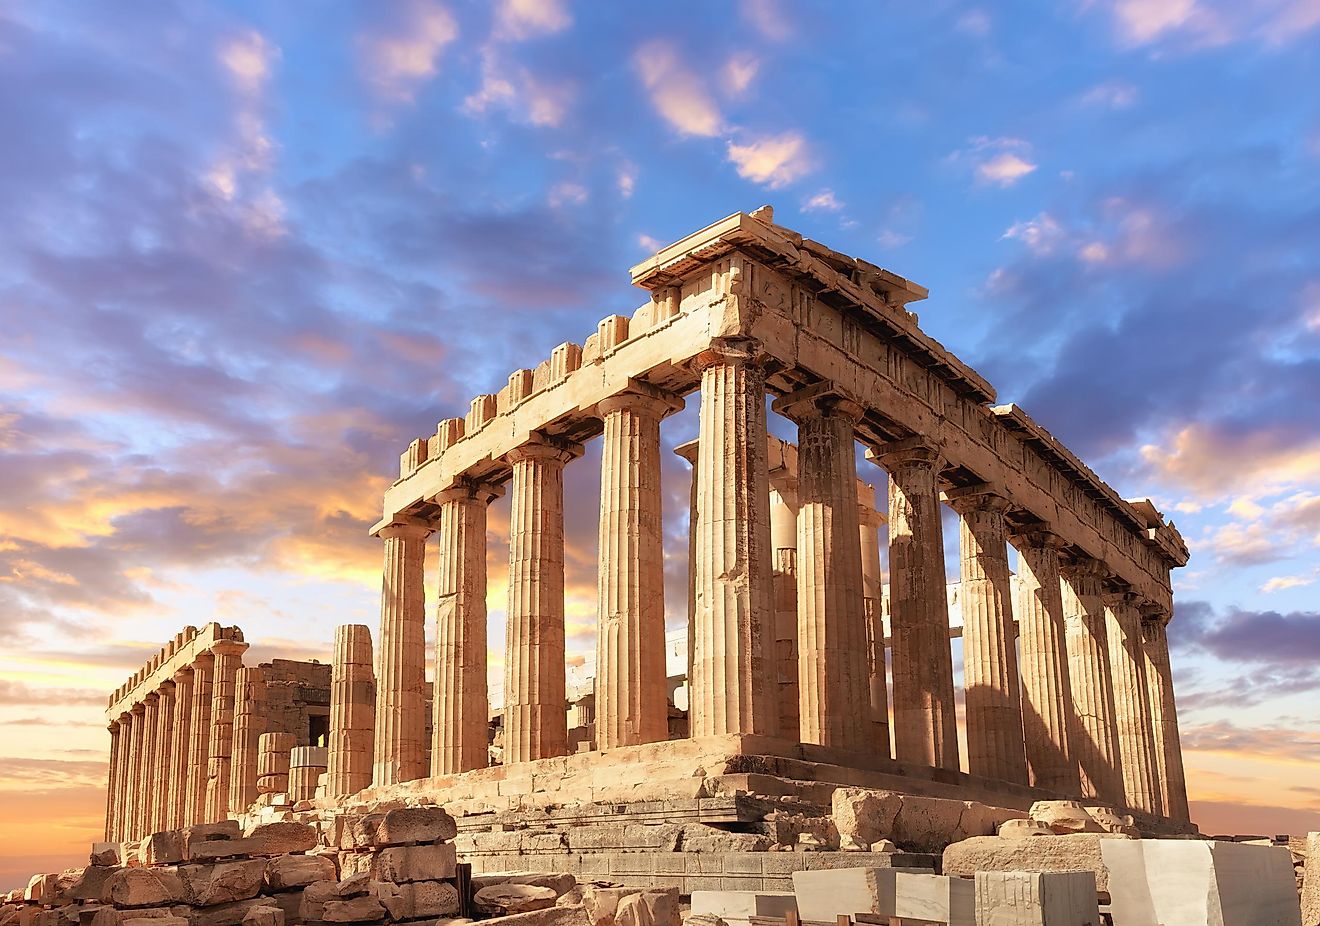 Parthenon was finished on 432 BCE, and even though it sustained substantial damage in 1687 during the Morean War.